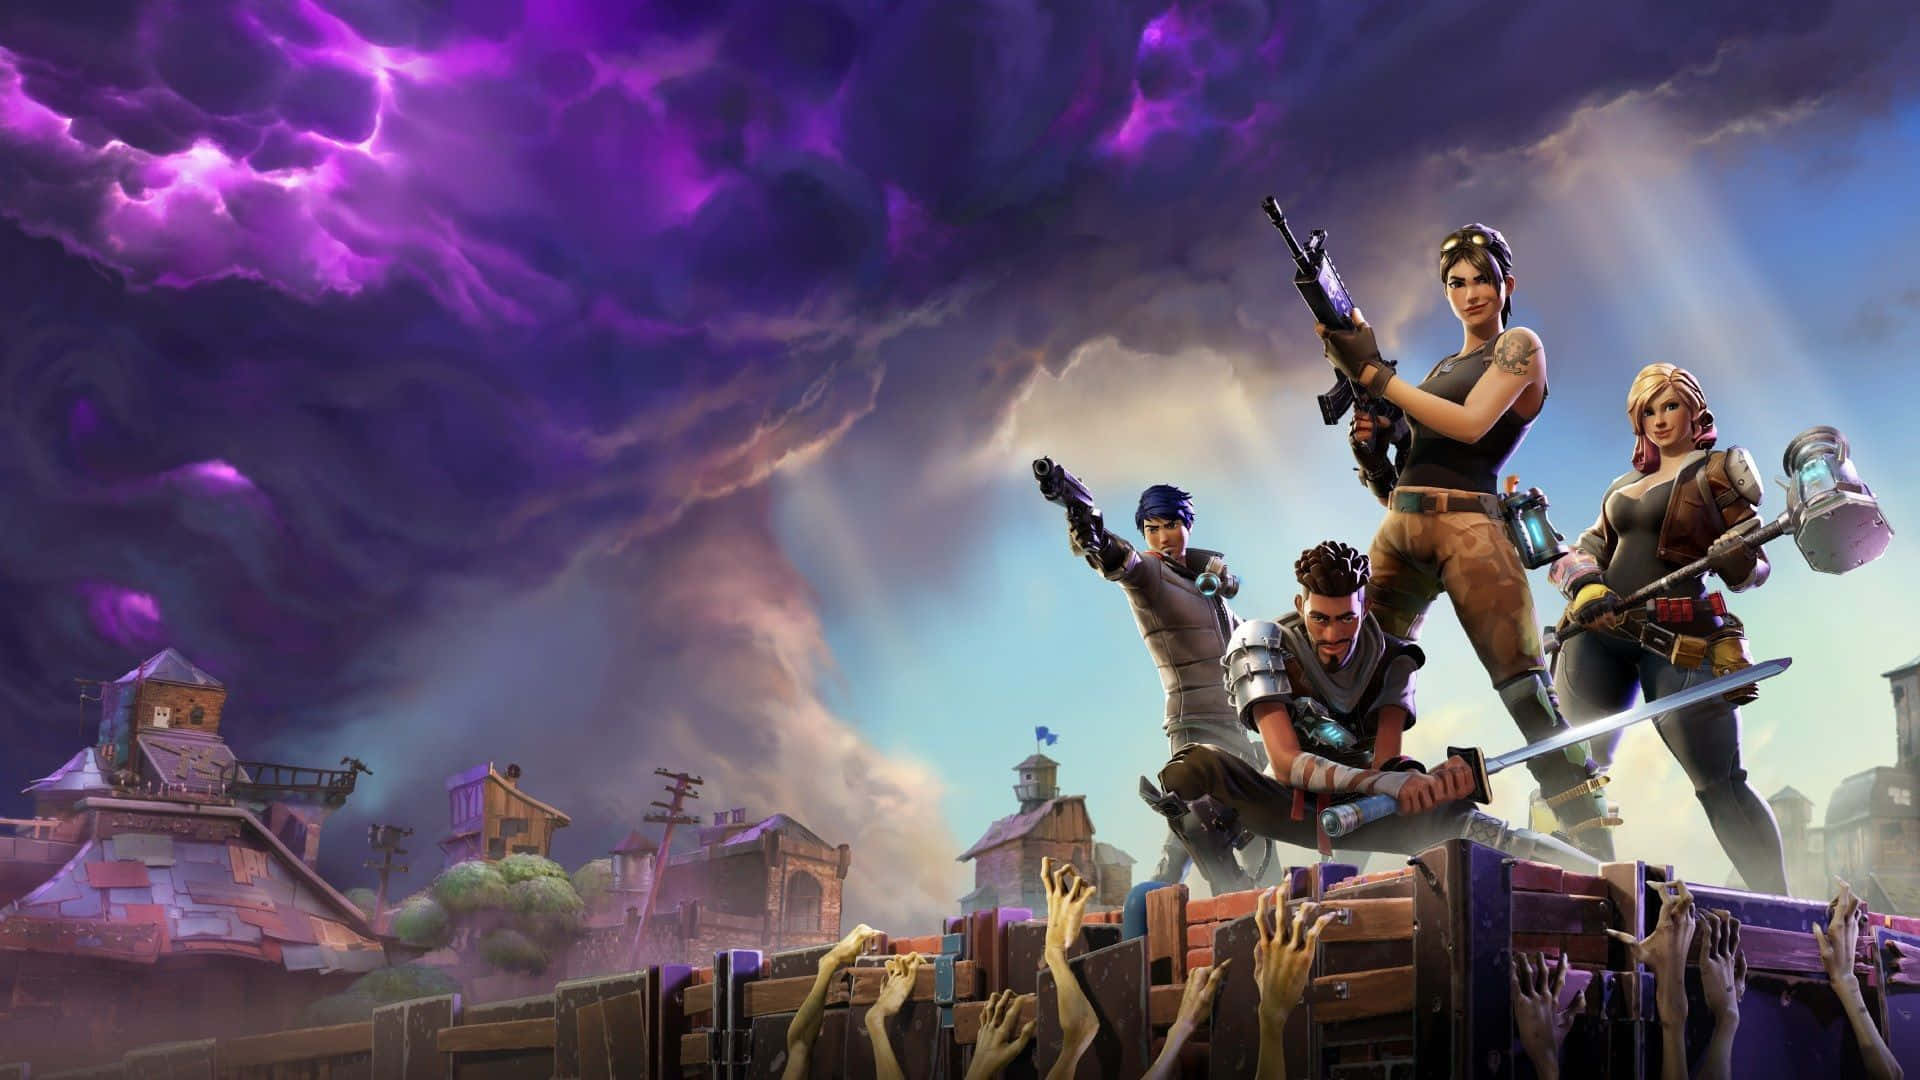 Fortnite - A New Game With A Purple Sky Wallpaper